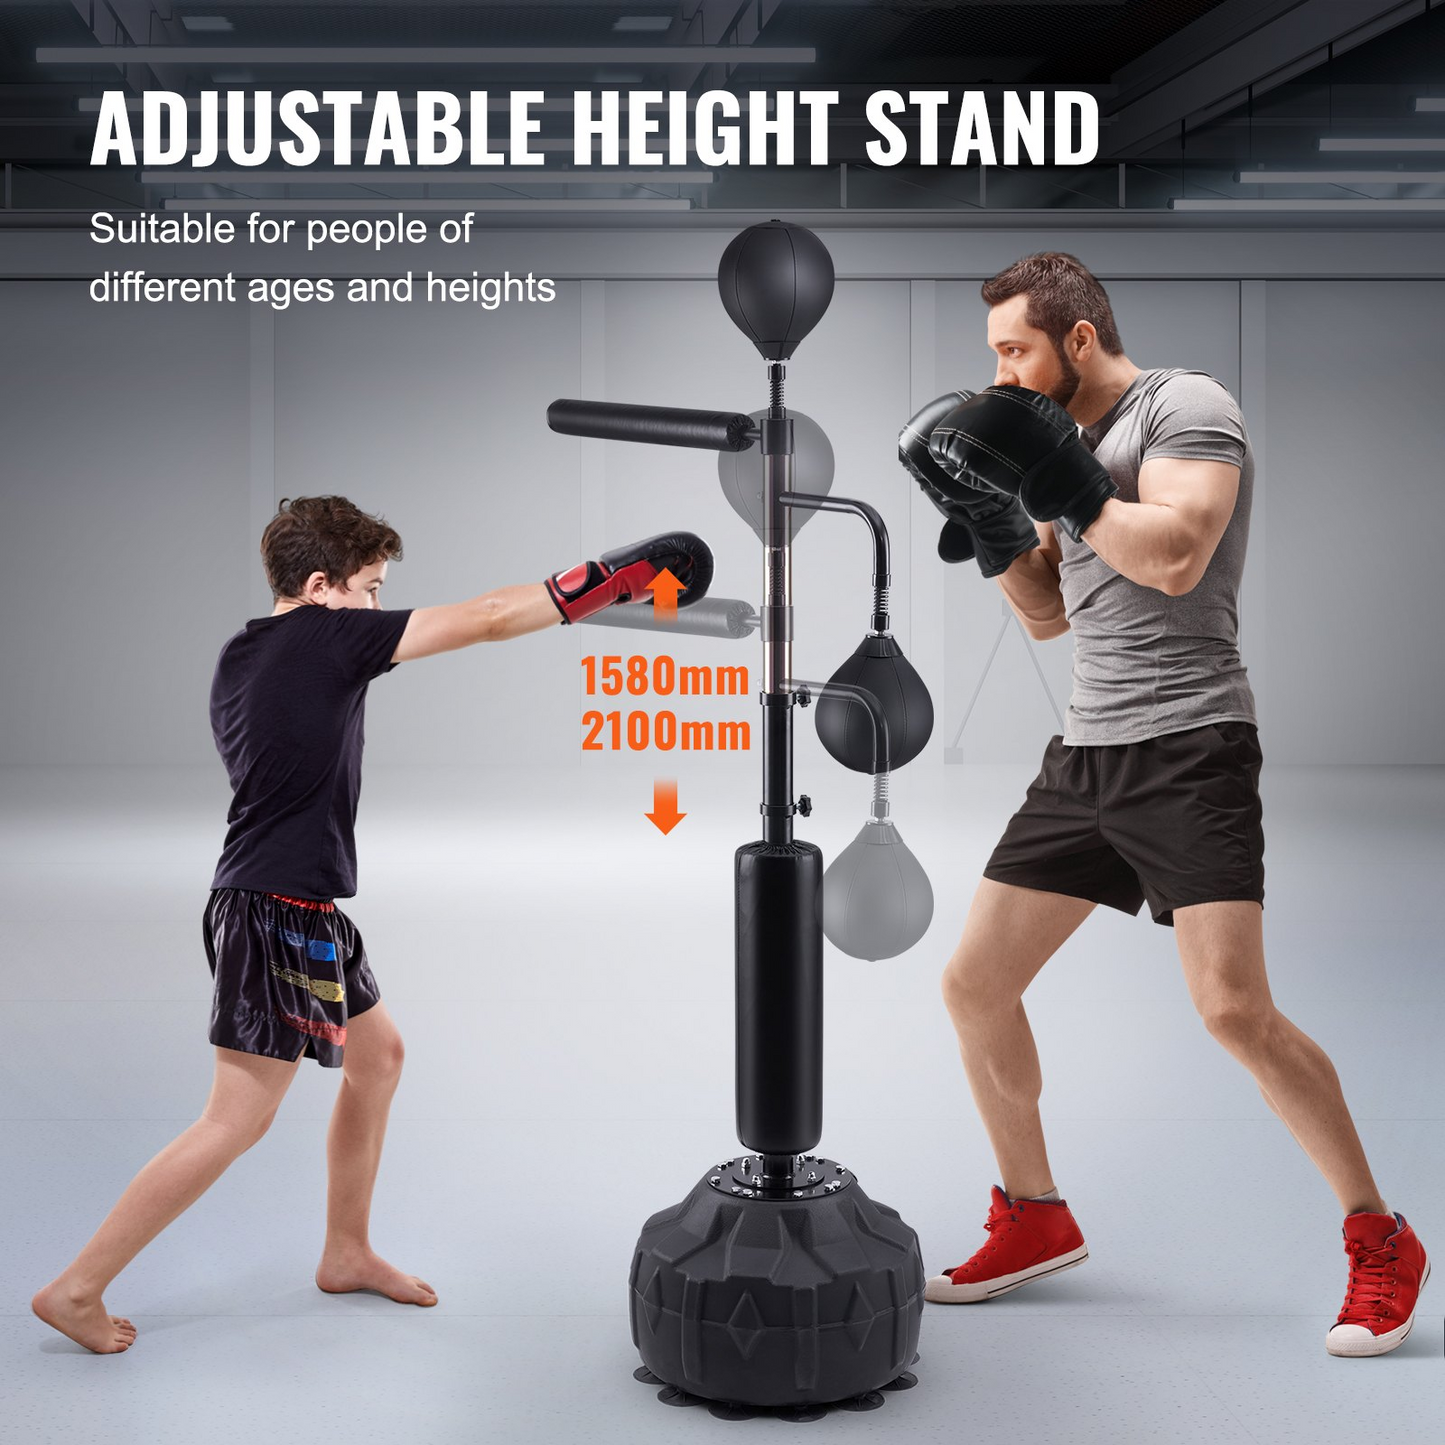 VEVOR Boxing Speed Trainer - Punching Bag with Stand - Height Adjustable Free Standing Strike Bag Set - Black, Goodies N Stuff